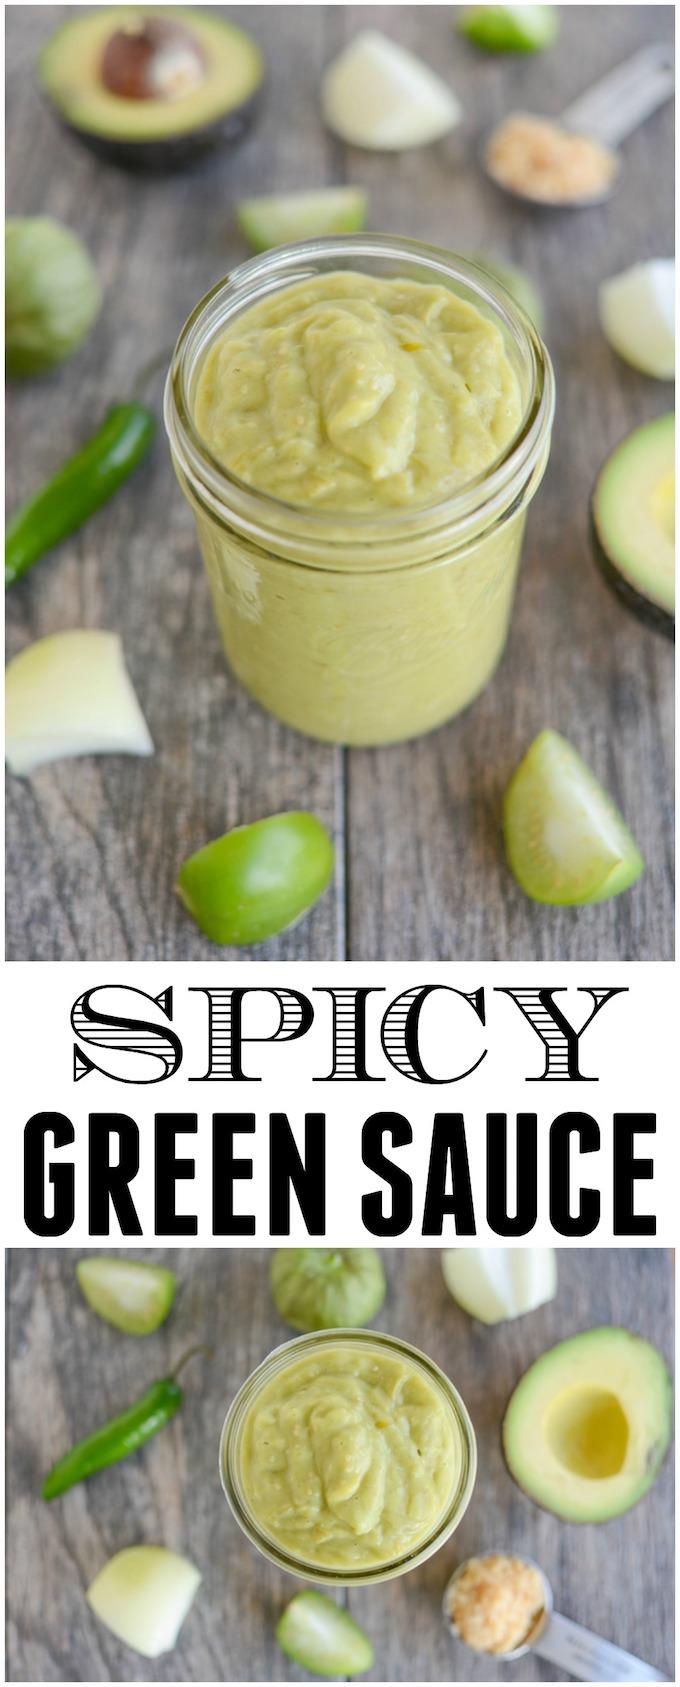 This Spicy Green Sauce is made with roasted tomatillos, avocado and just a few other ingredients. Combine them all in the blender for a simple, flavorful sauce that's good on everything from chicken to vegetables!